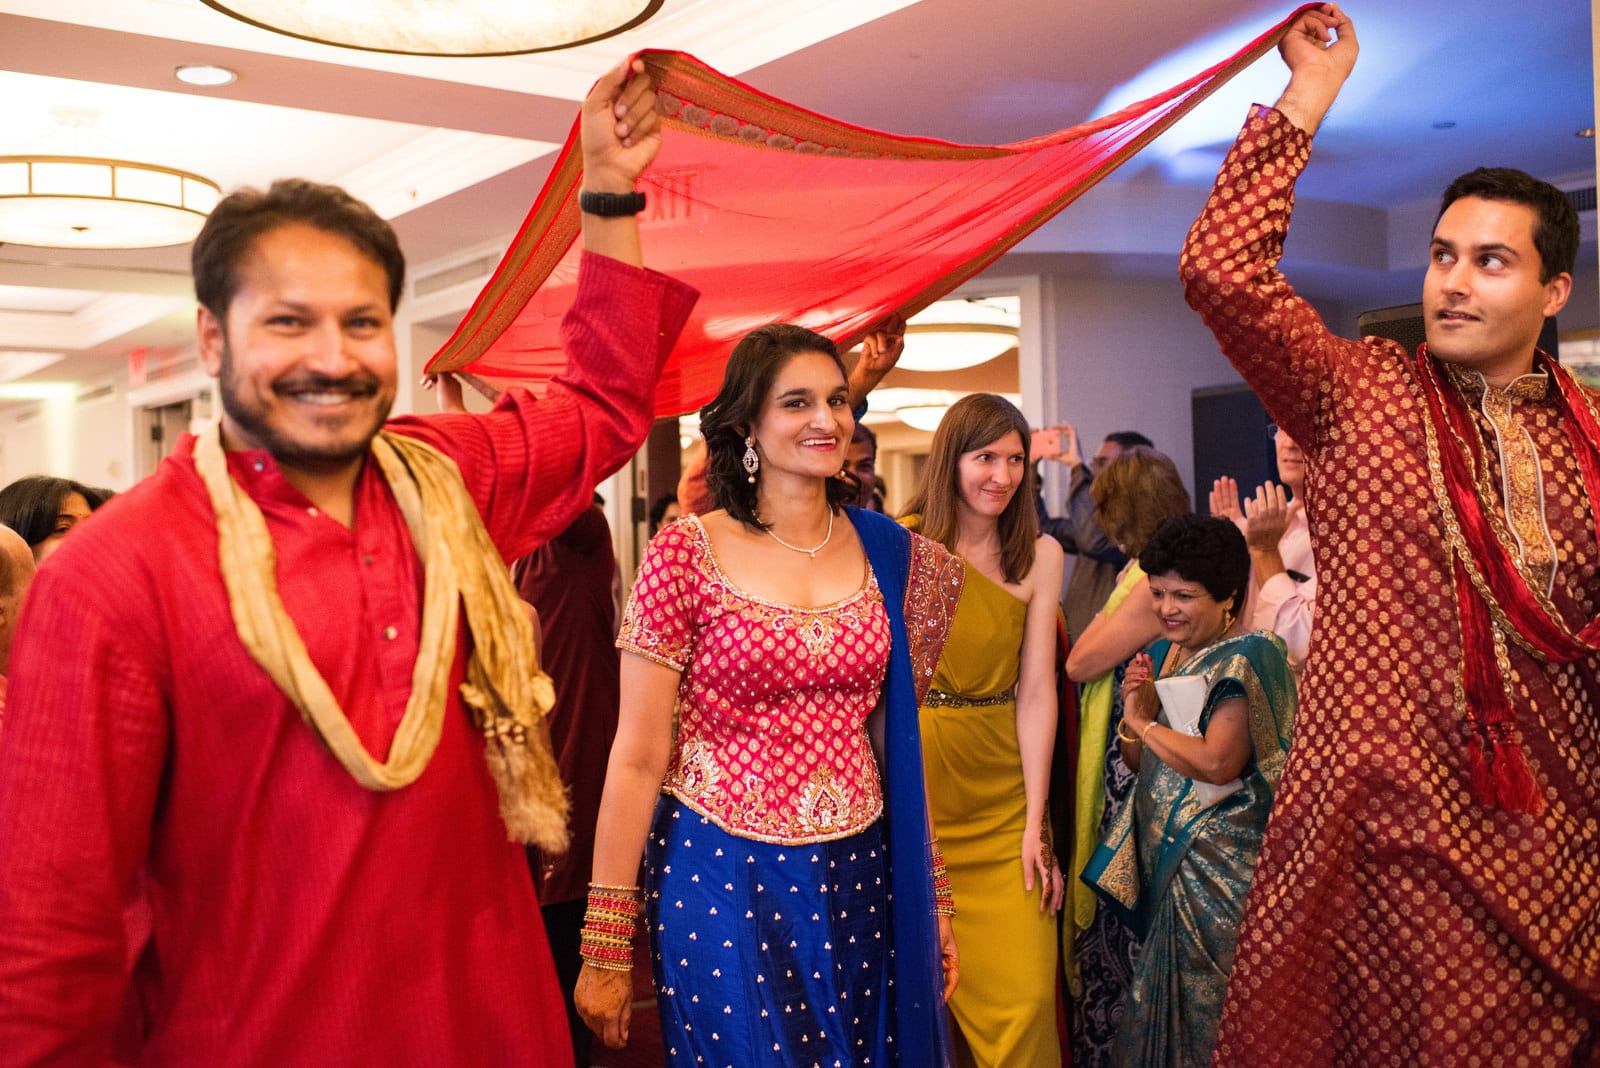 A bride enters her sangeet dressed in a red and blue sari beneath a red cloth held aloft by four tall men at her Renaissance Phipps South Asian Wedding.